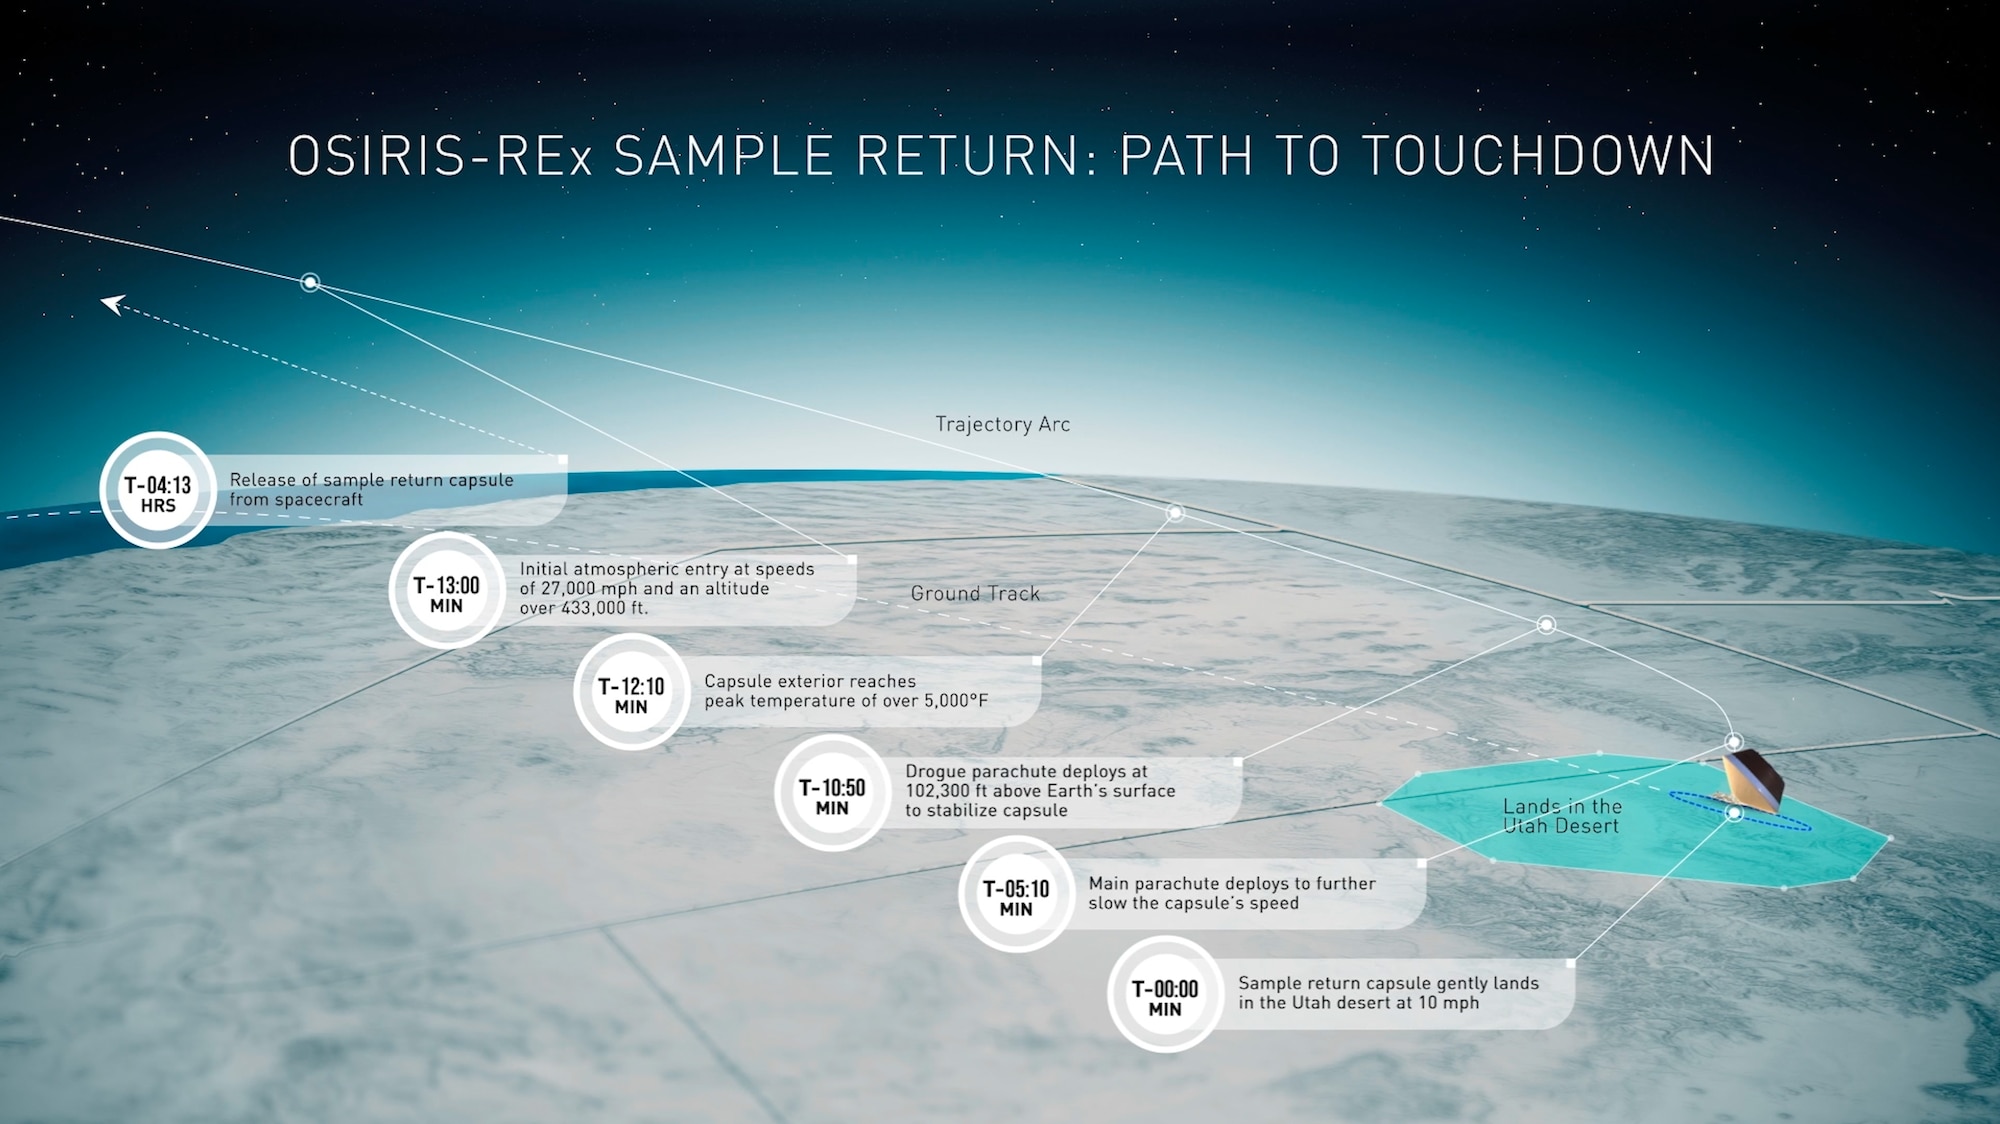 This graphic shows the events that happen between the time the OSIRIS-REx spacecraft releases its sample capsule to the time it lands in the Utah desert. Credit: Lockheed Martin.